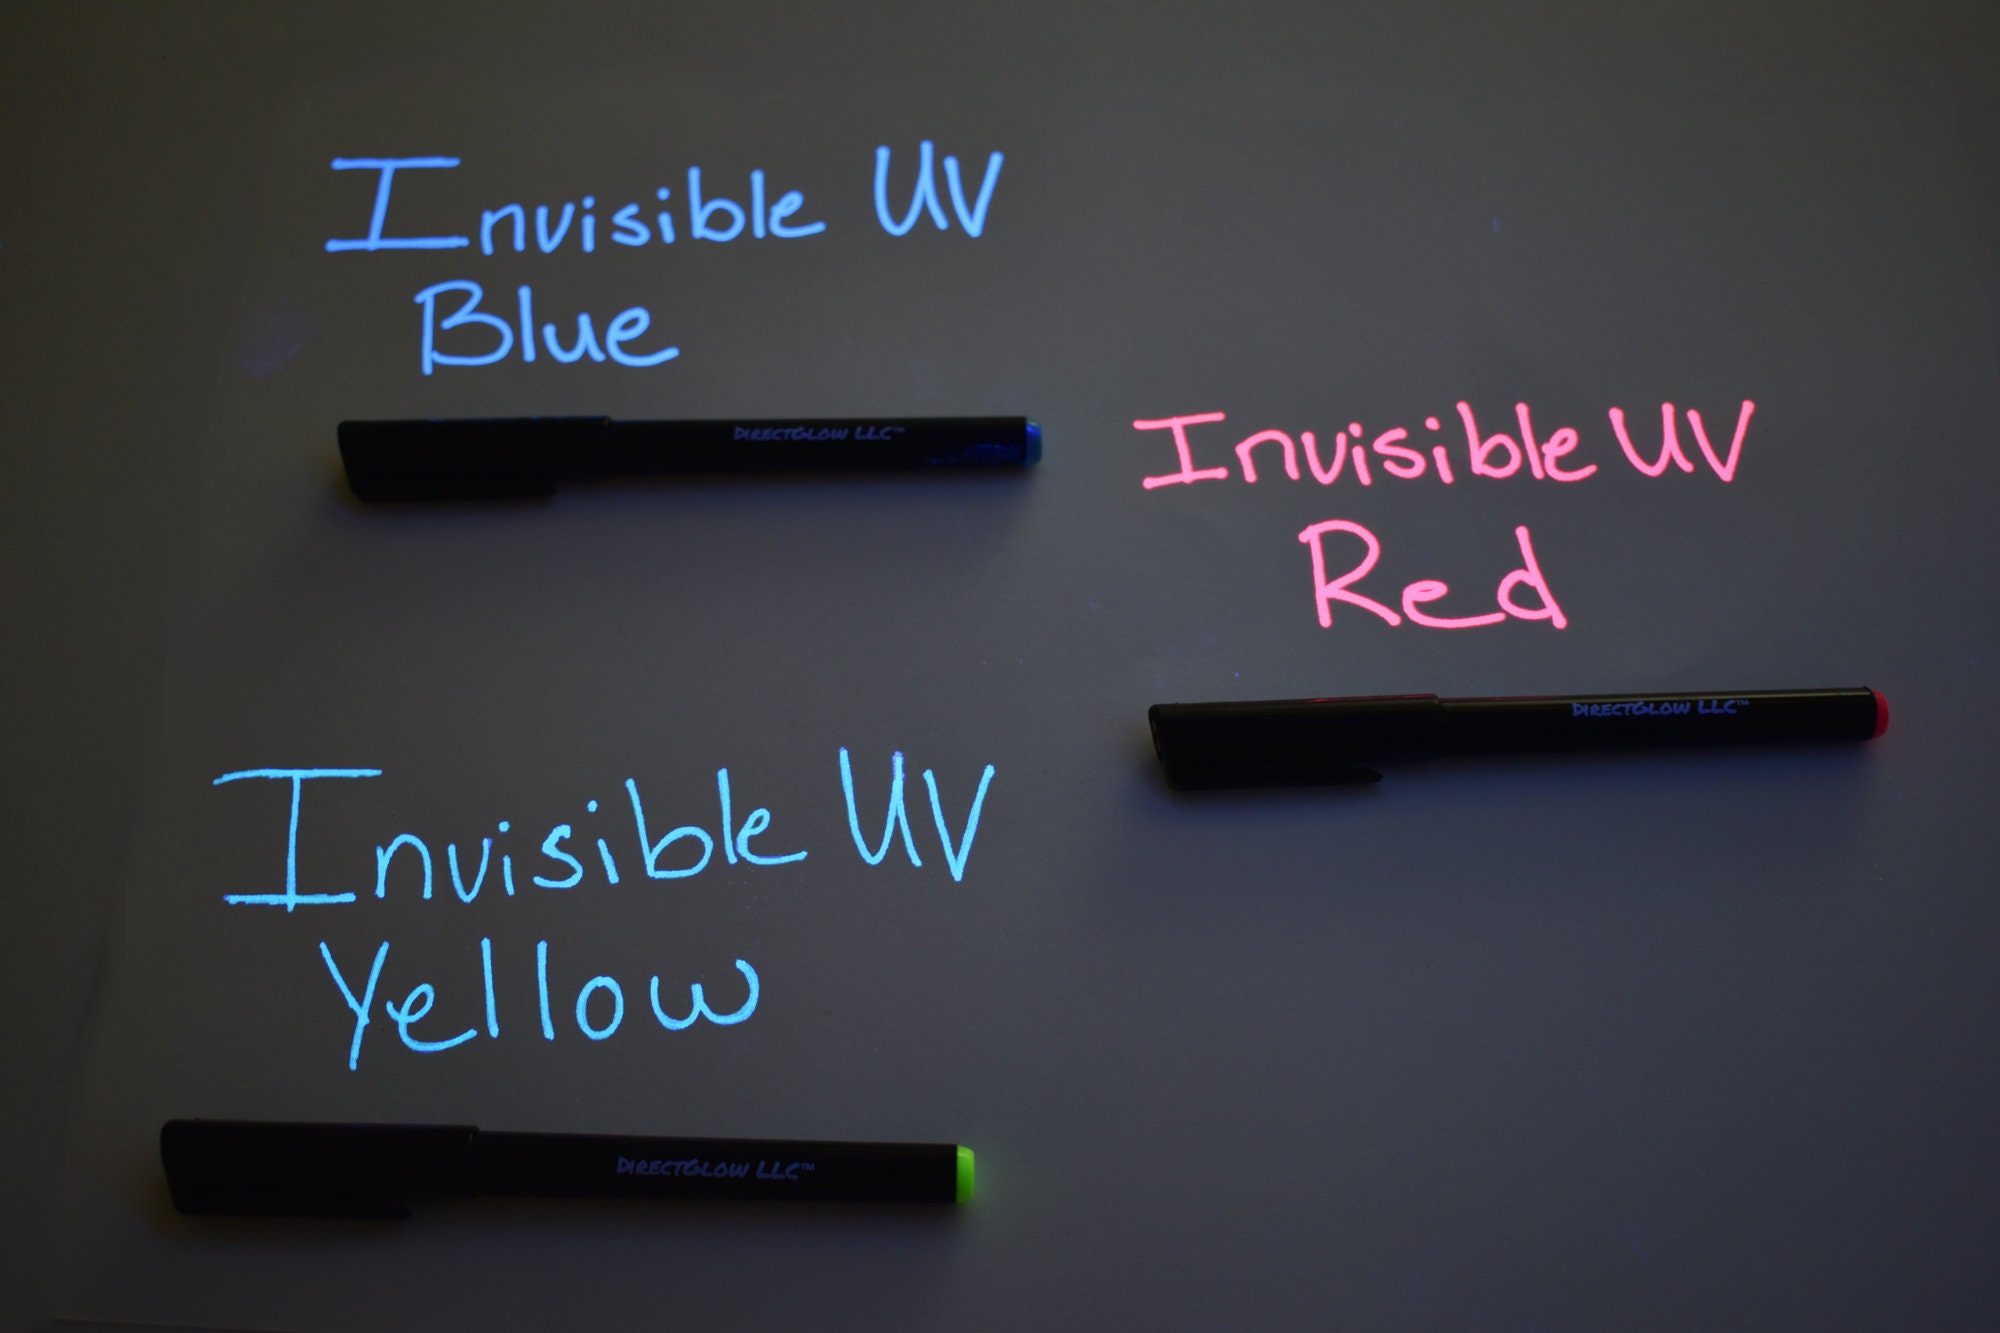  DirectGlow Invisible UV Ink Marker Pen with Ultraviolet LED  Keychain Blacklight : Office Products